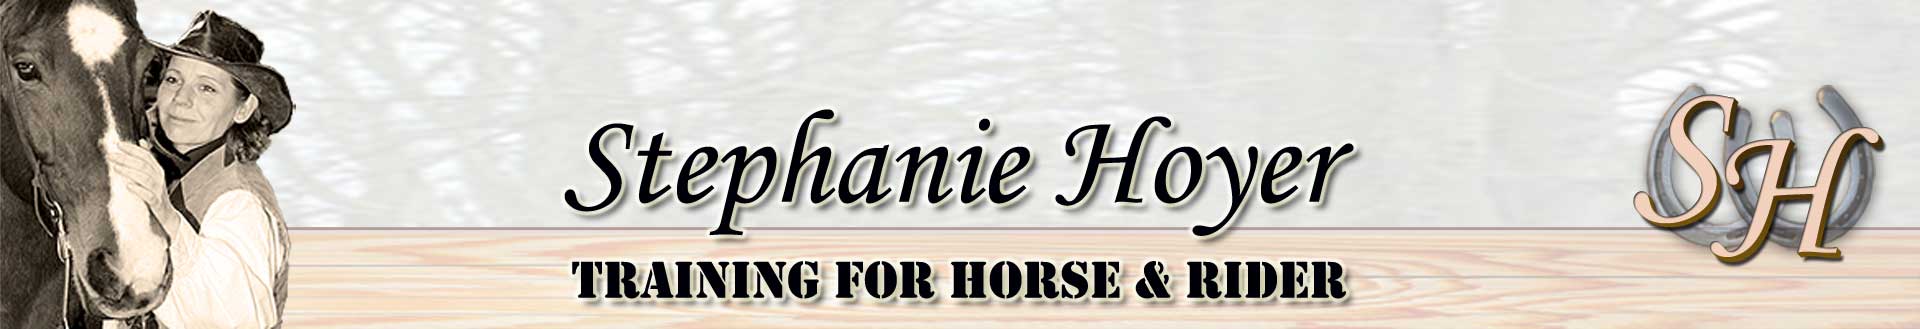 Stephanie Hoyer - Training for Horse and Rider